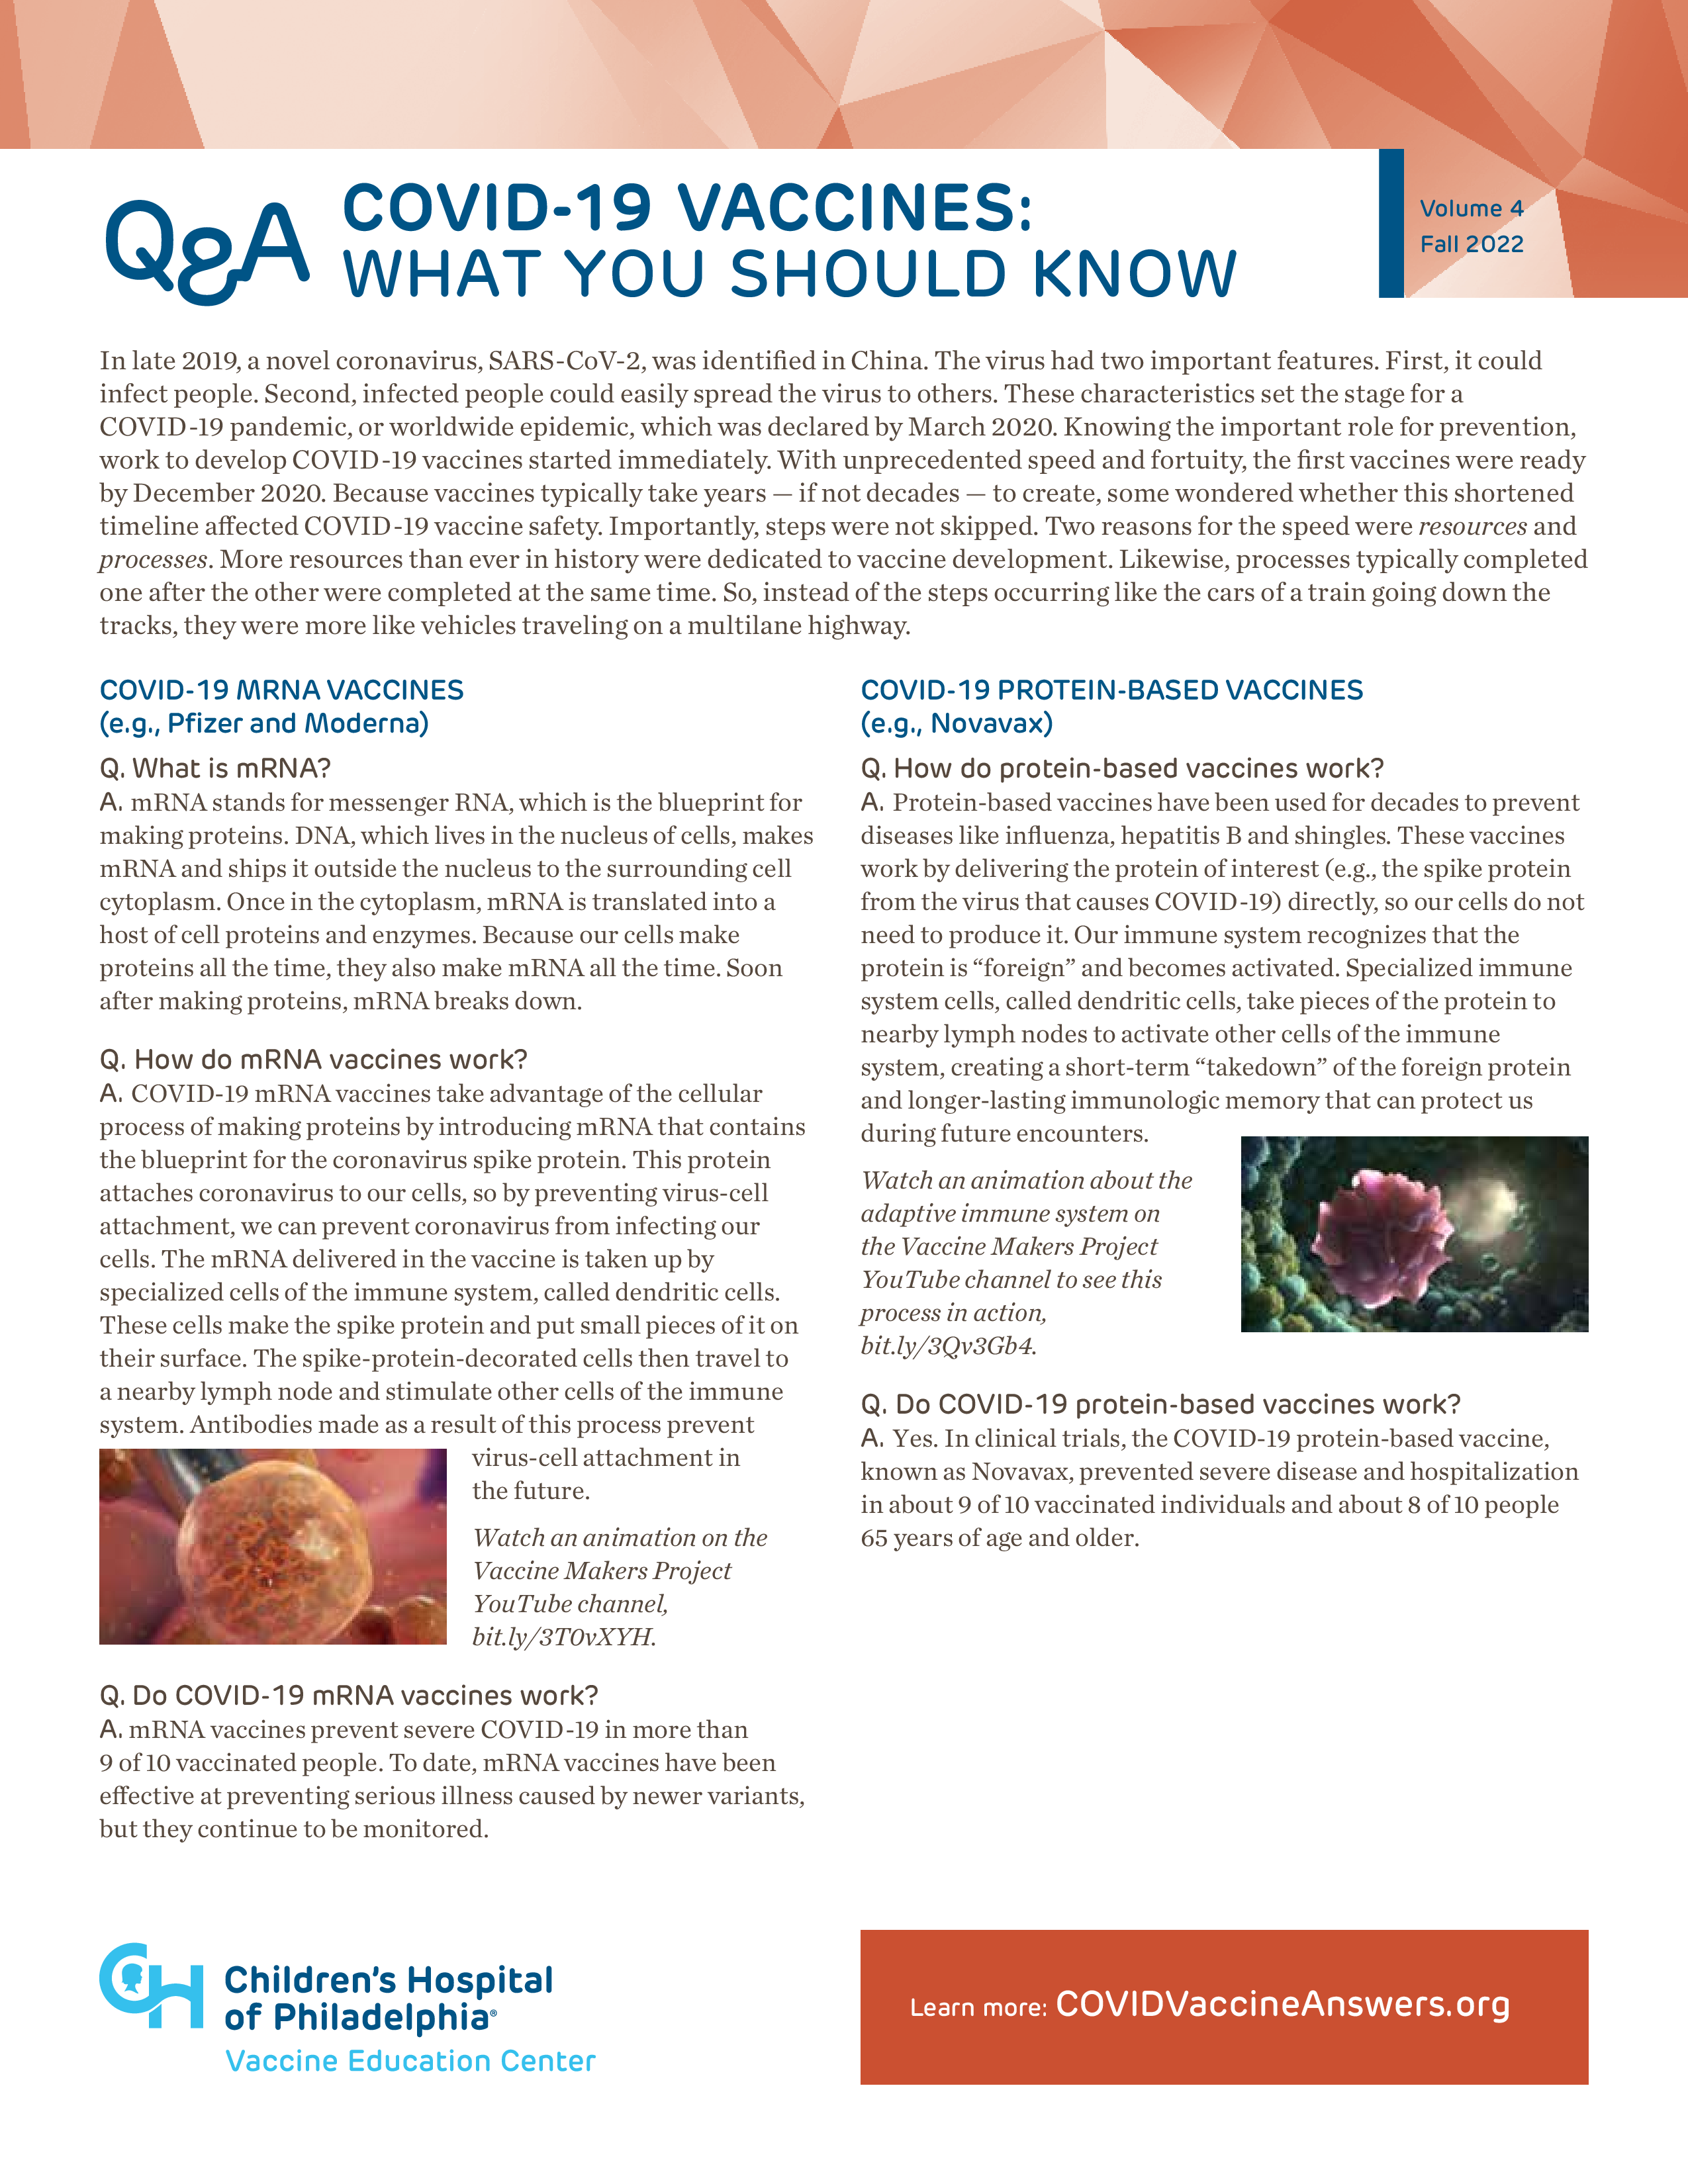 Factsheet with a white background and blue and black text in a question and answer format. Children's Hospital of Philadelphia logo is at the bottom left corner and a weblink to learn more is at the bottom right corner.